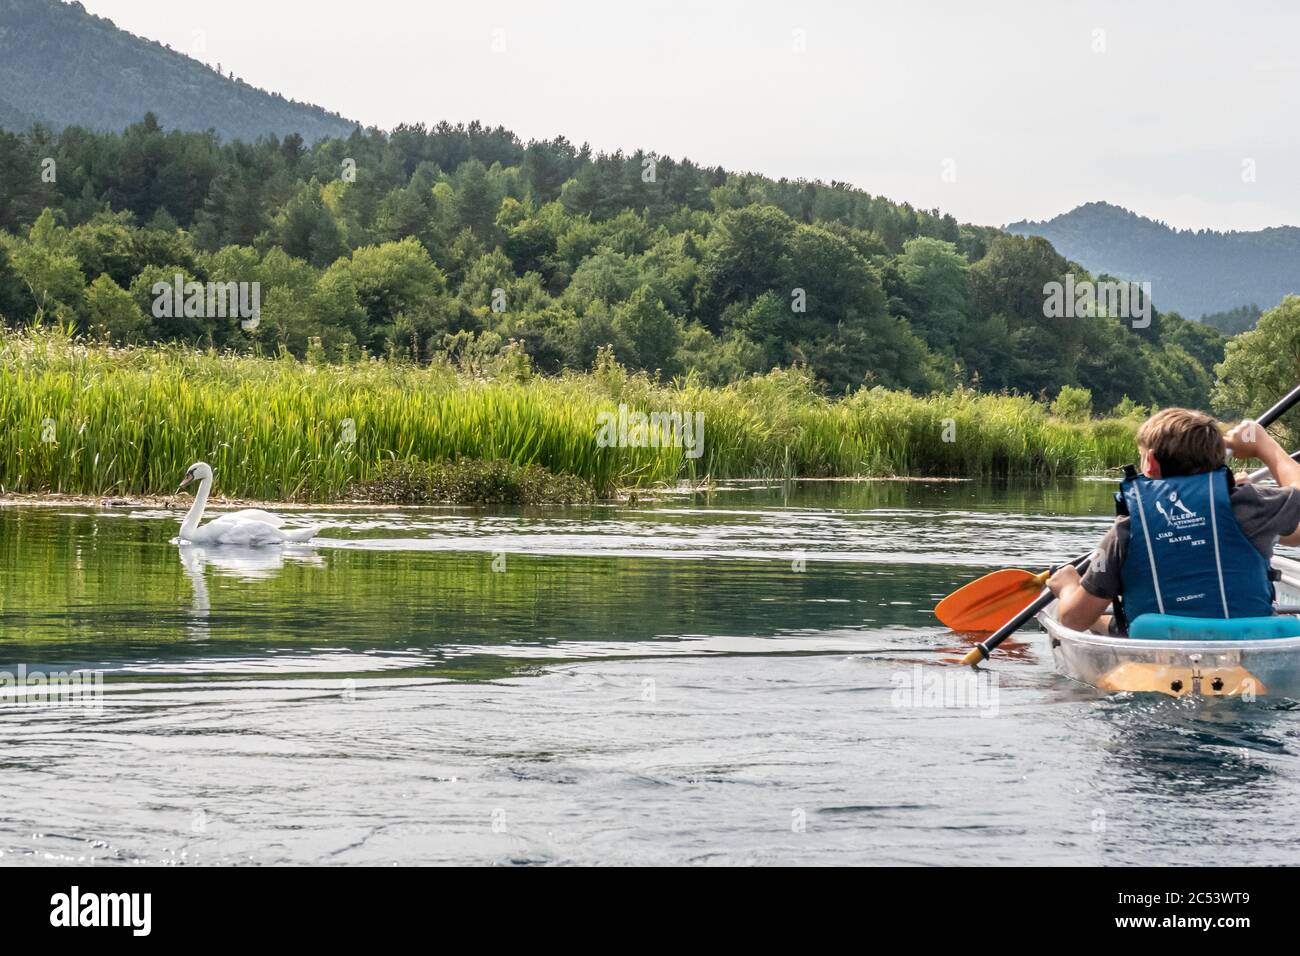 Young people enjoying a kayaking experience on the calm clear waters of the river Gacka, Otocac, Lika, Croatia Stock Photo